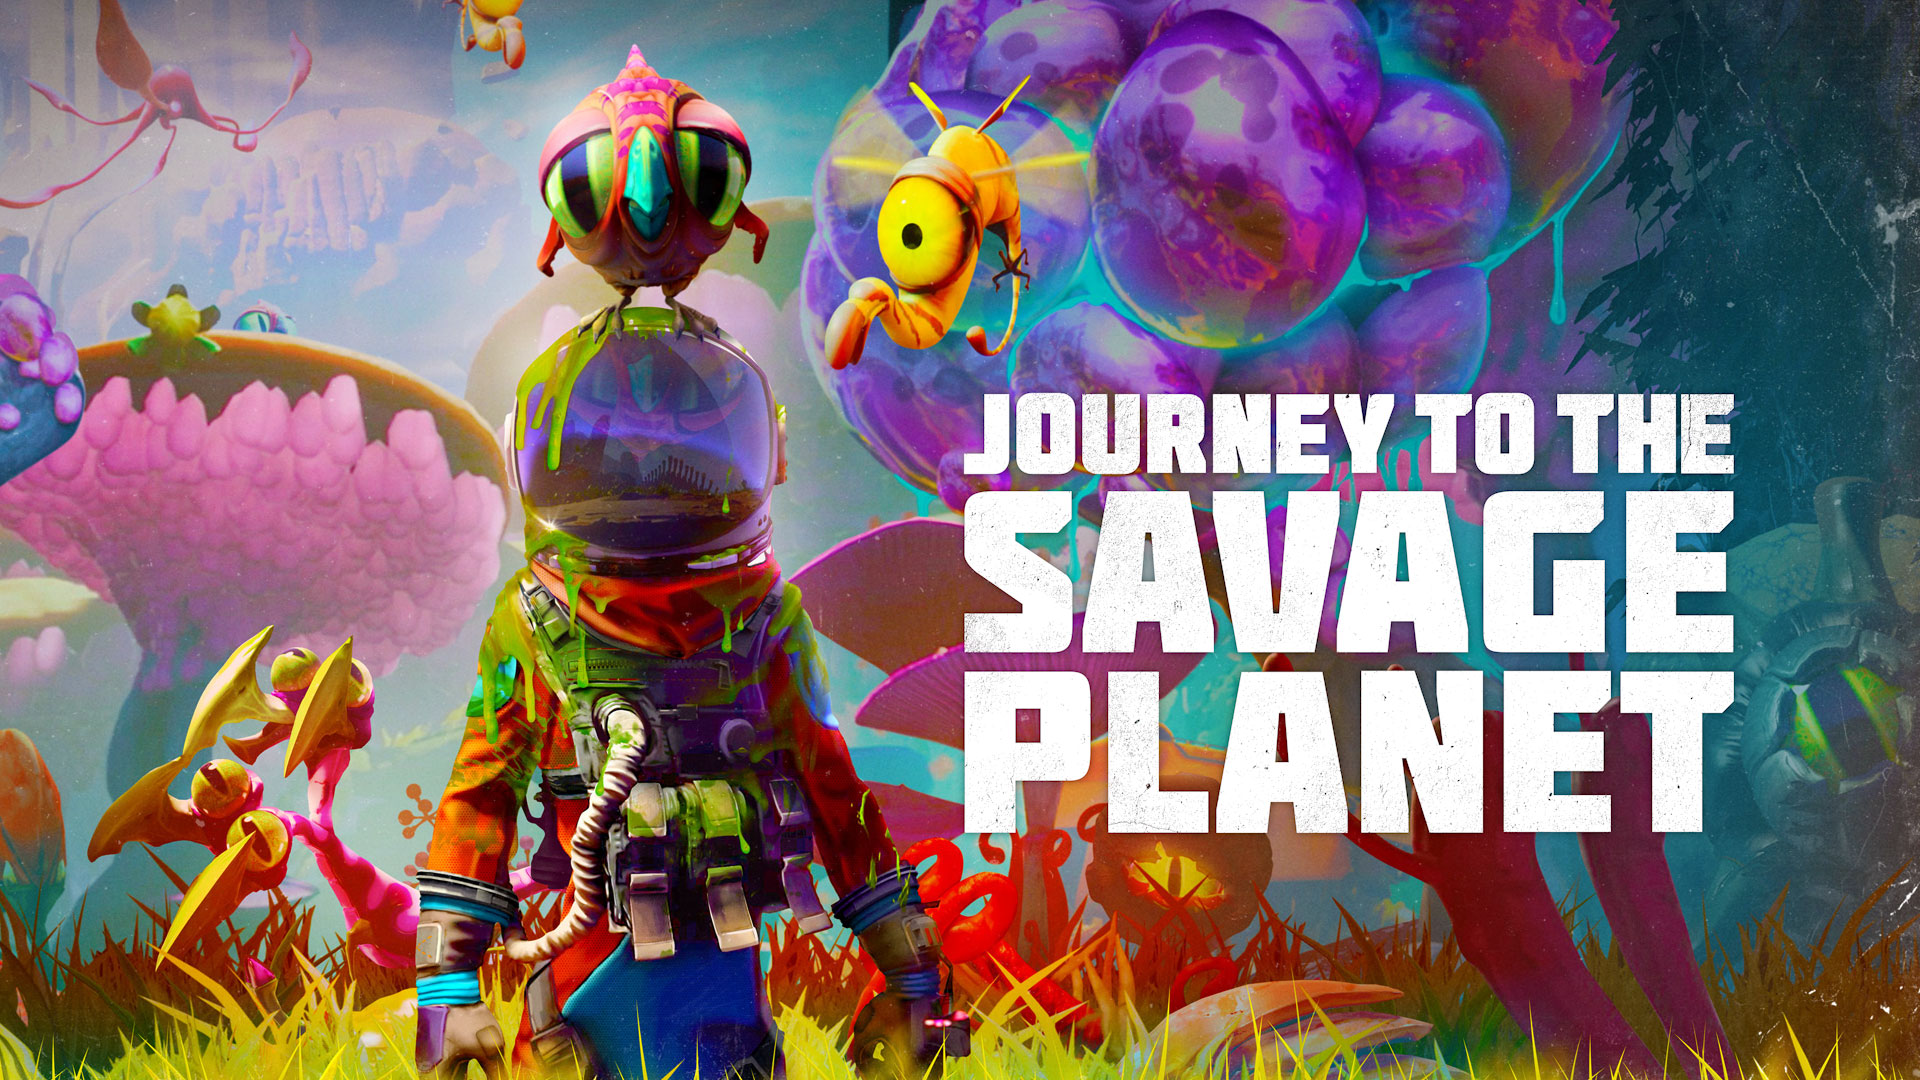 Journey To The Savage Planet Pembaruan Versi 1.04 Catatan Patch Penuh (PS4, Xbox One, PC)